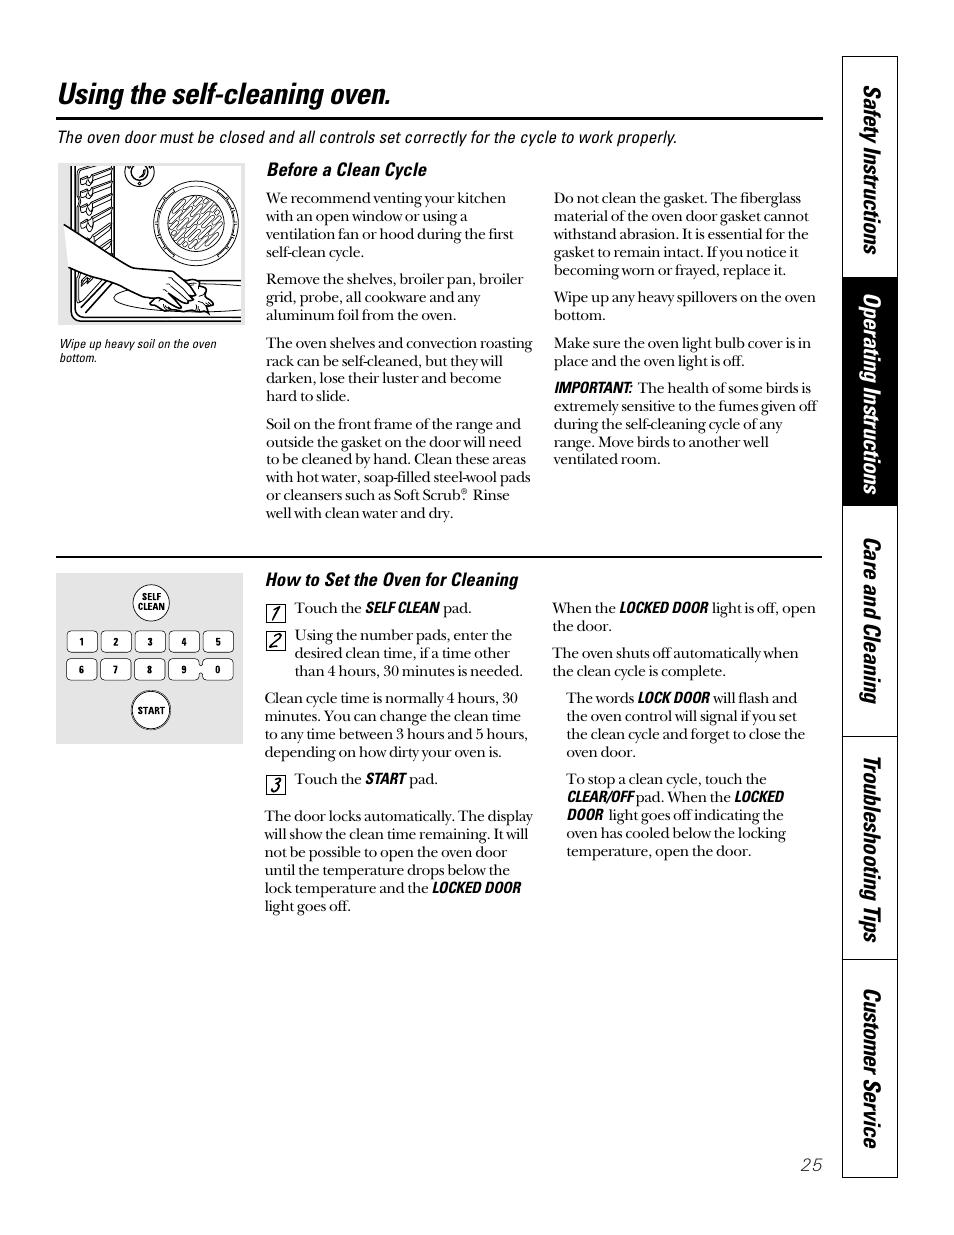 Self-cleaning, Self-cleaning , 26, Using the self-cleaning oven | Sharp JB940 User Manual | Page 25 / 40